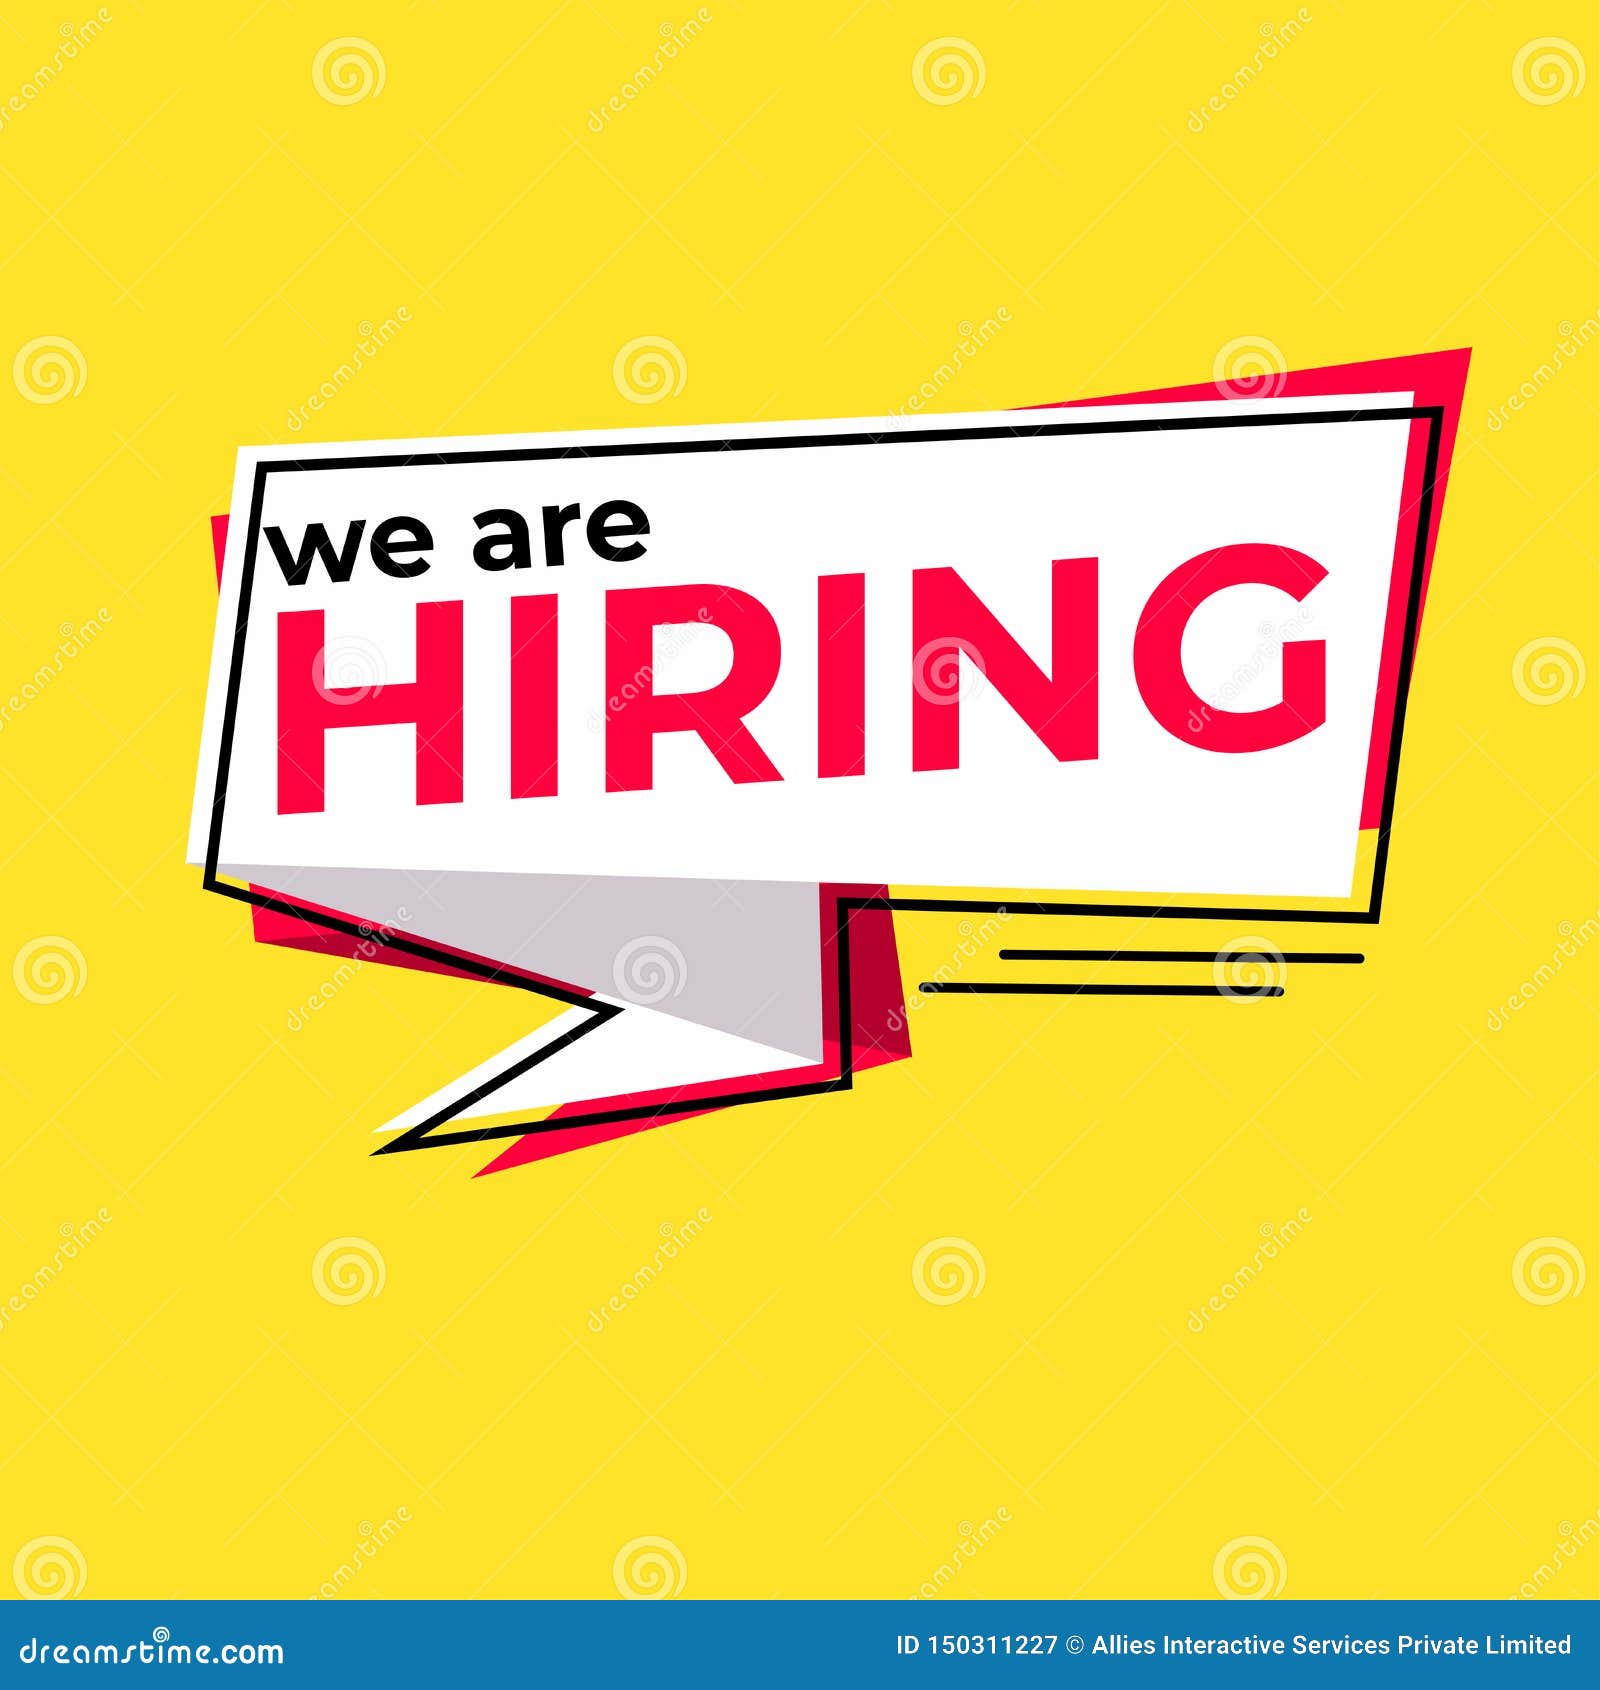 We Are Hiring Advertising Poster Or Template Design Stock Illustration Illustration Of Position Office 150311227